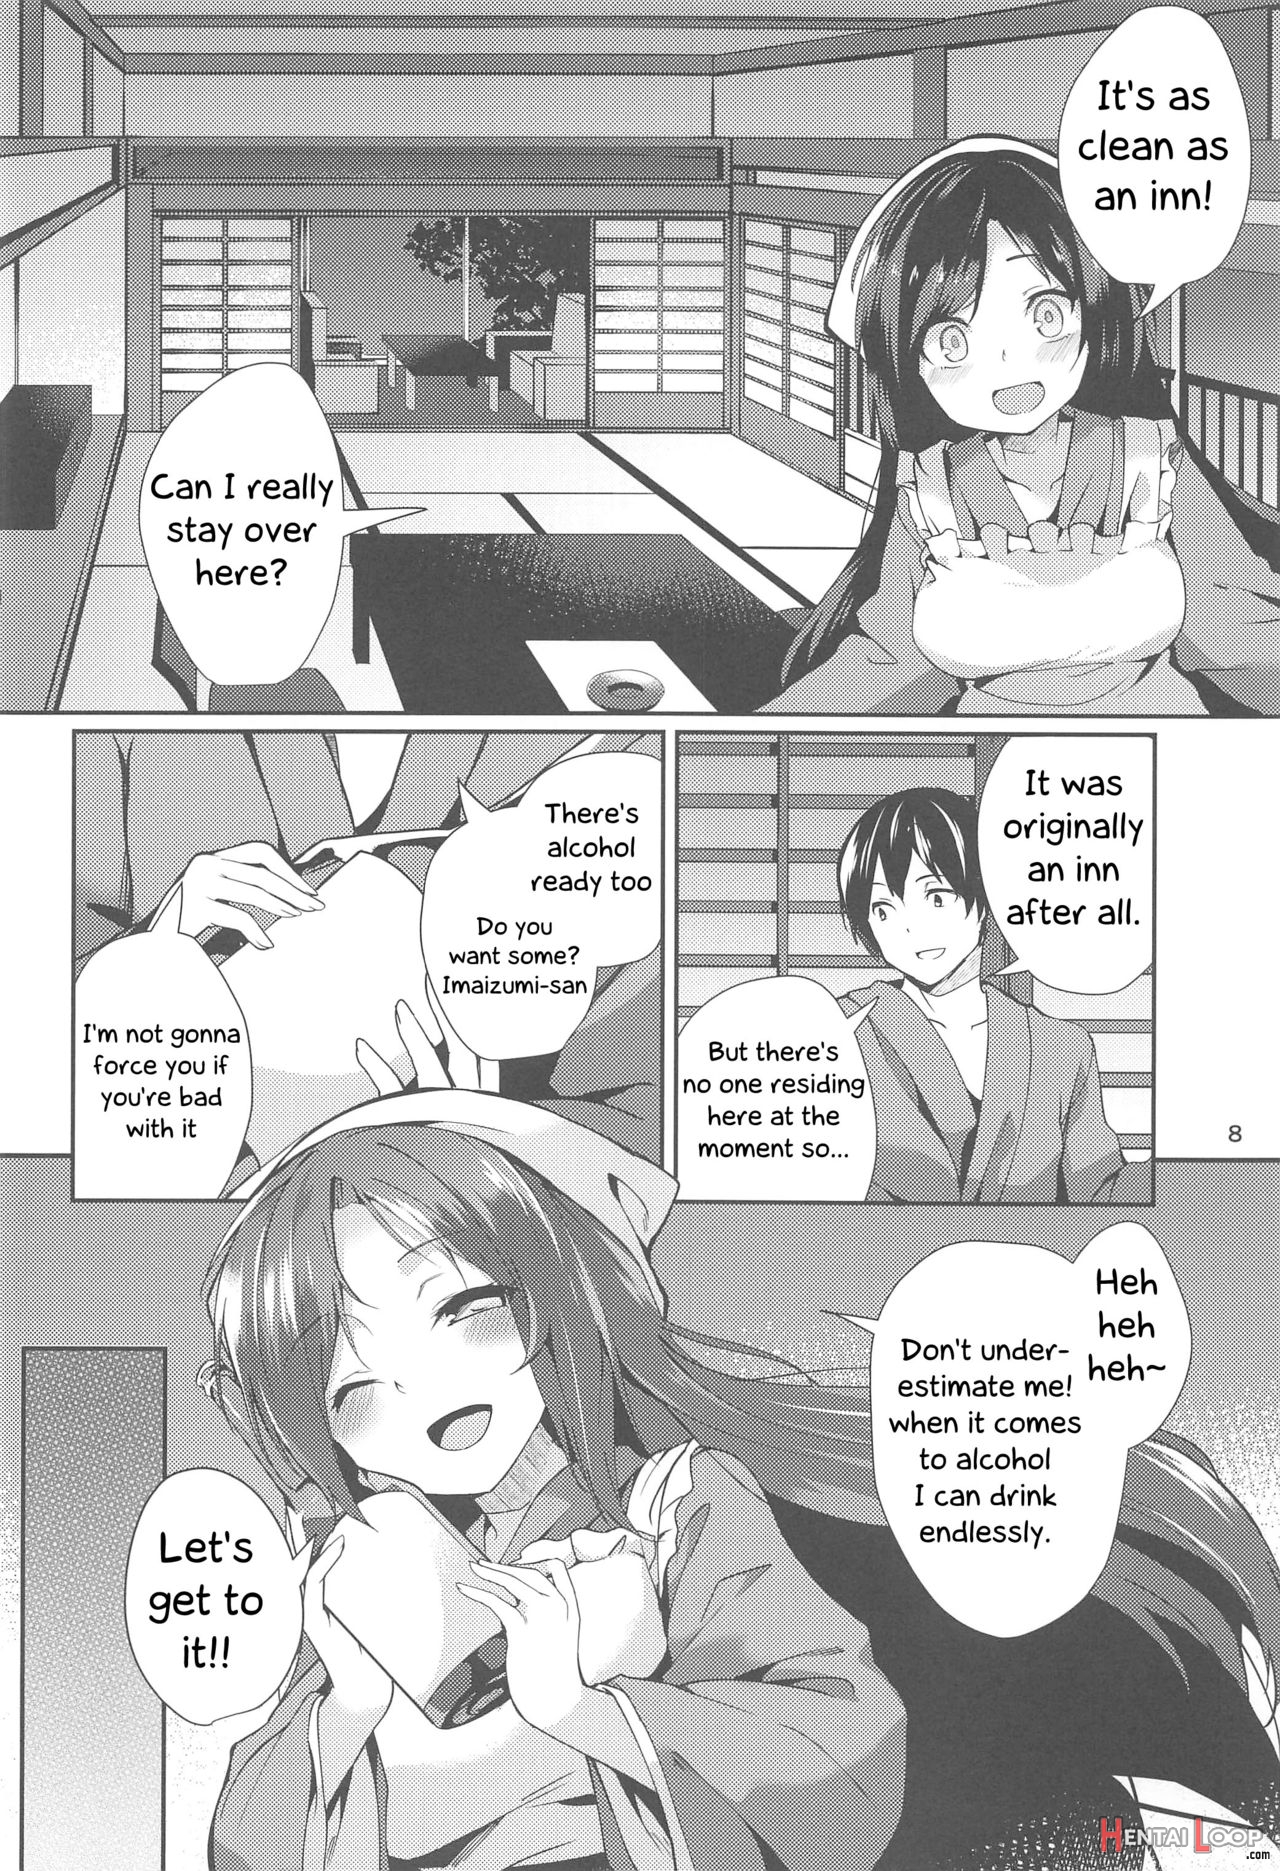 Kagerou's Human Exposure Record page 7